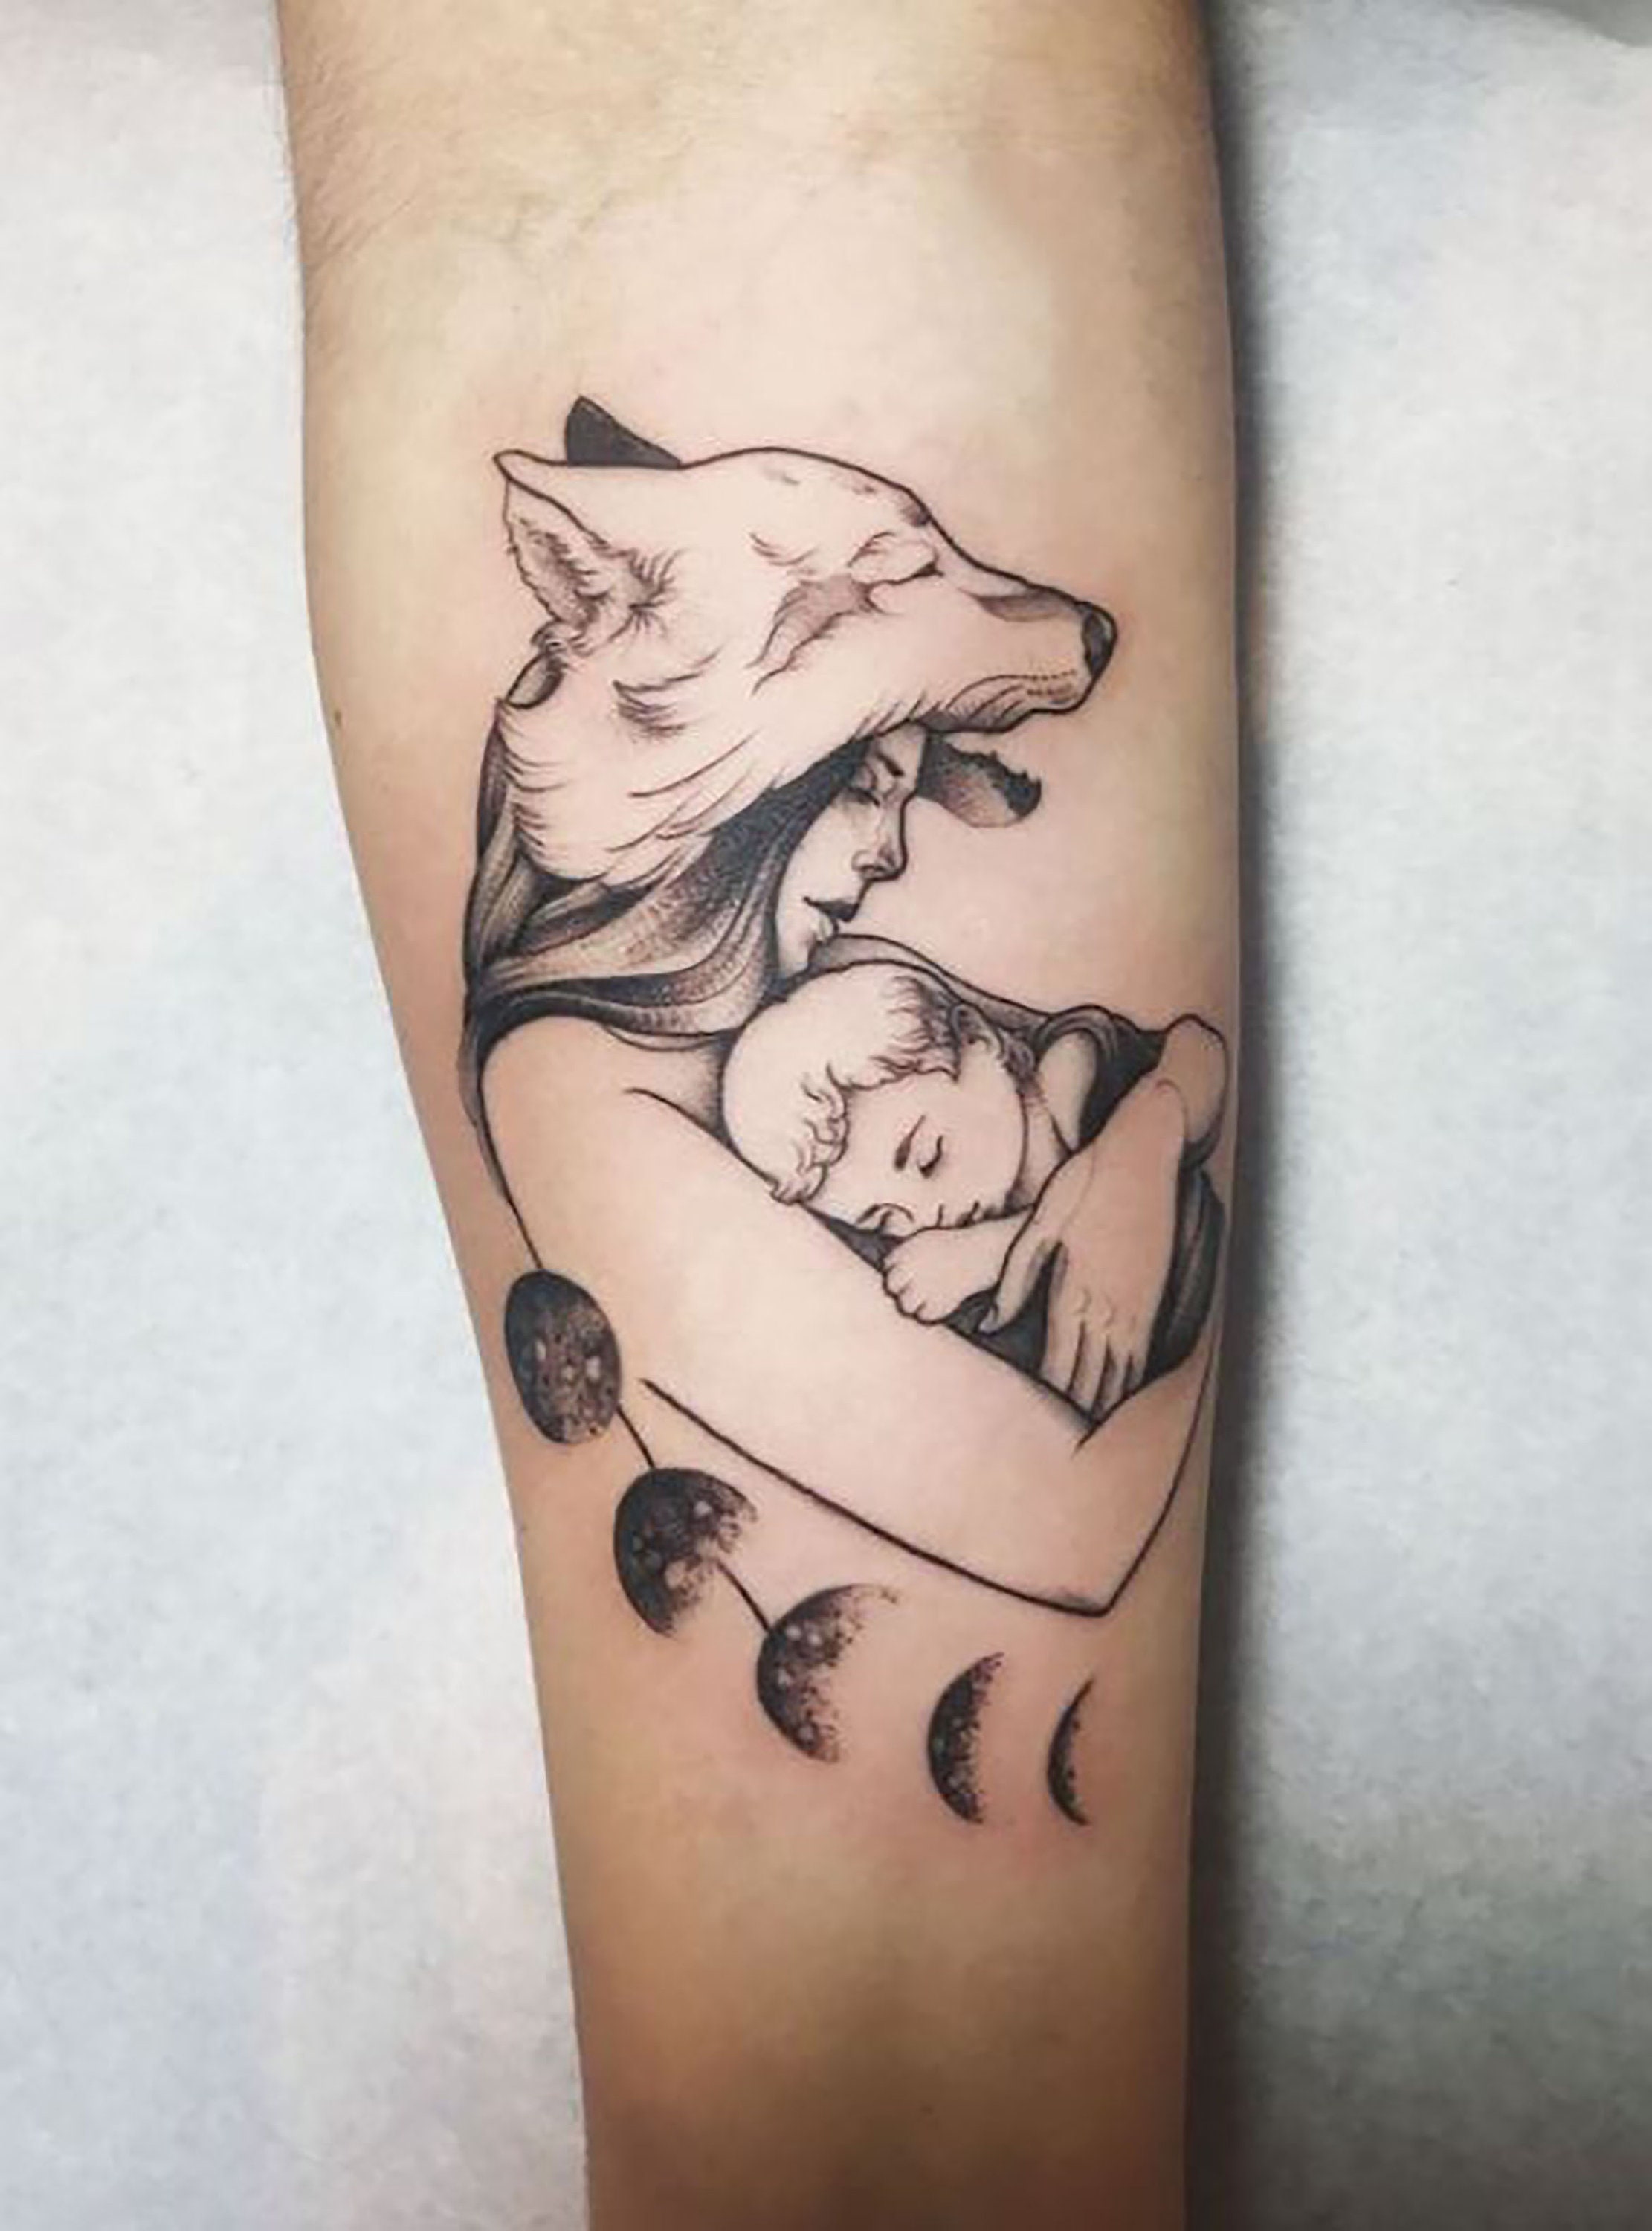 Momma wolf and baby wolf tattoo - Tattoogrid.net